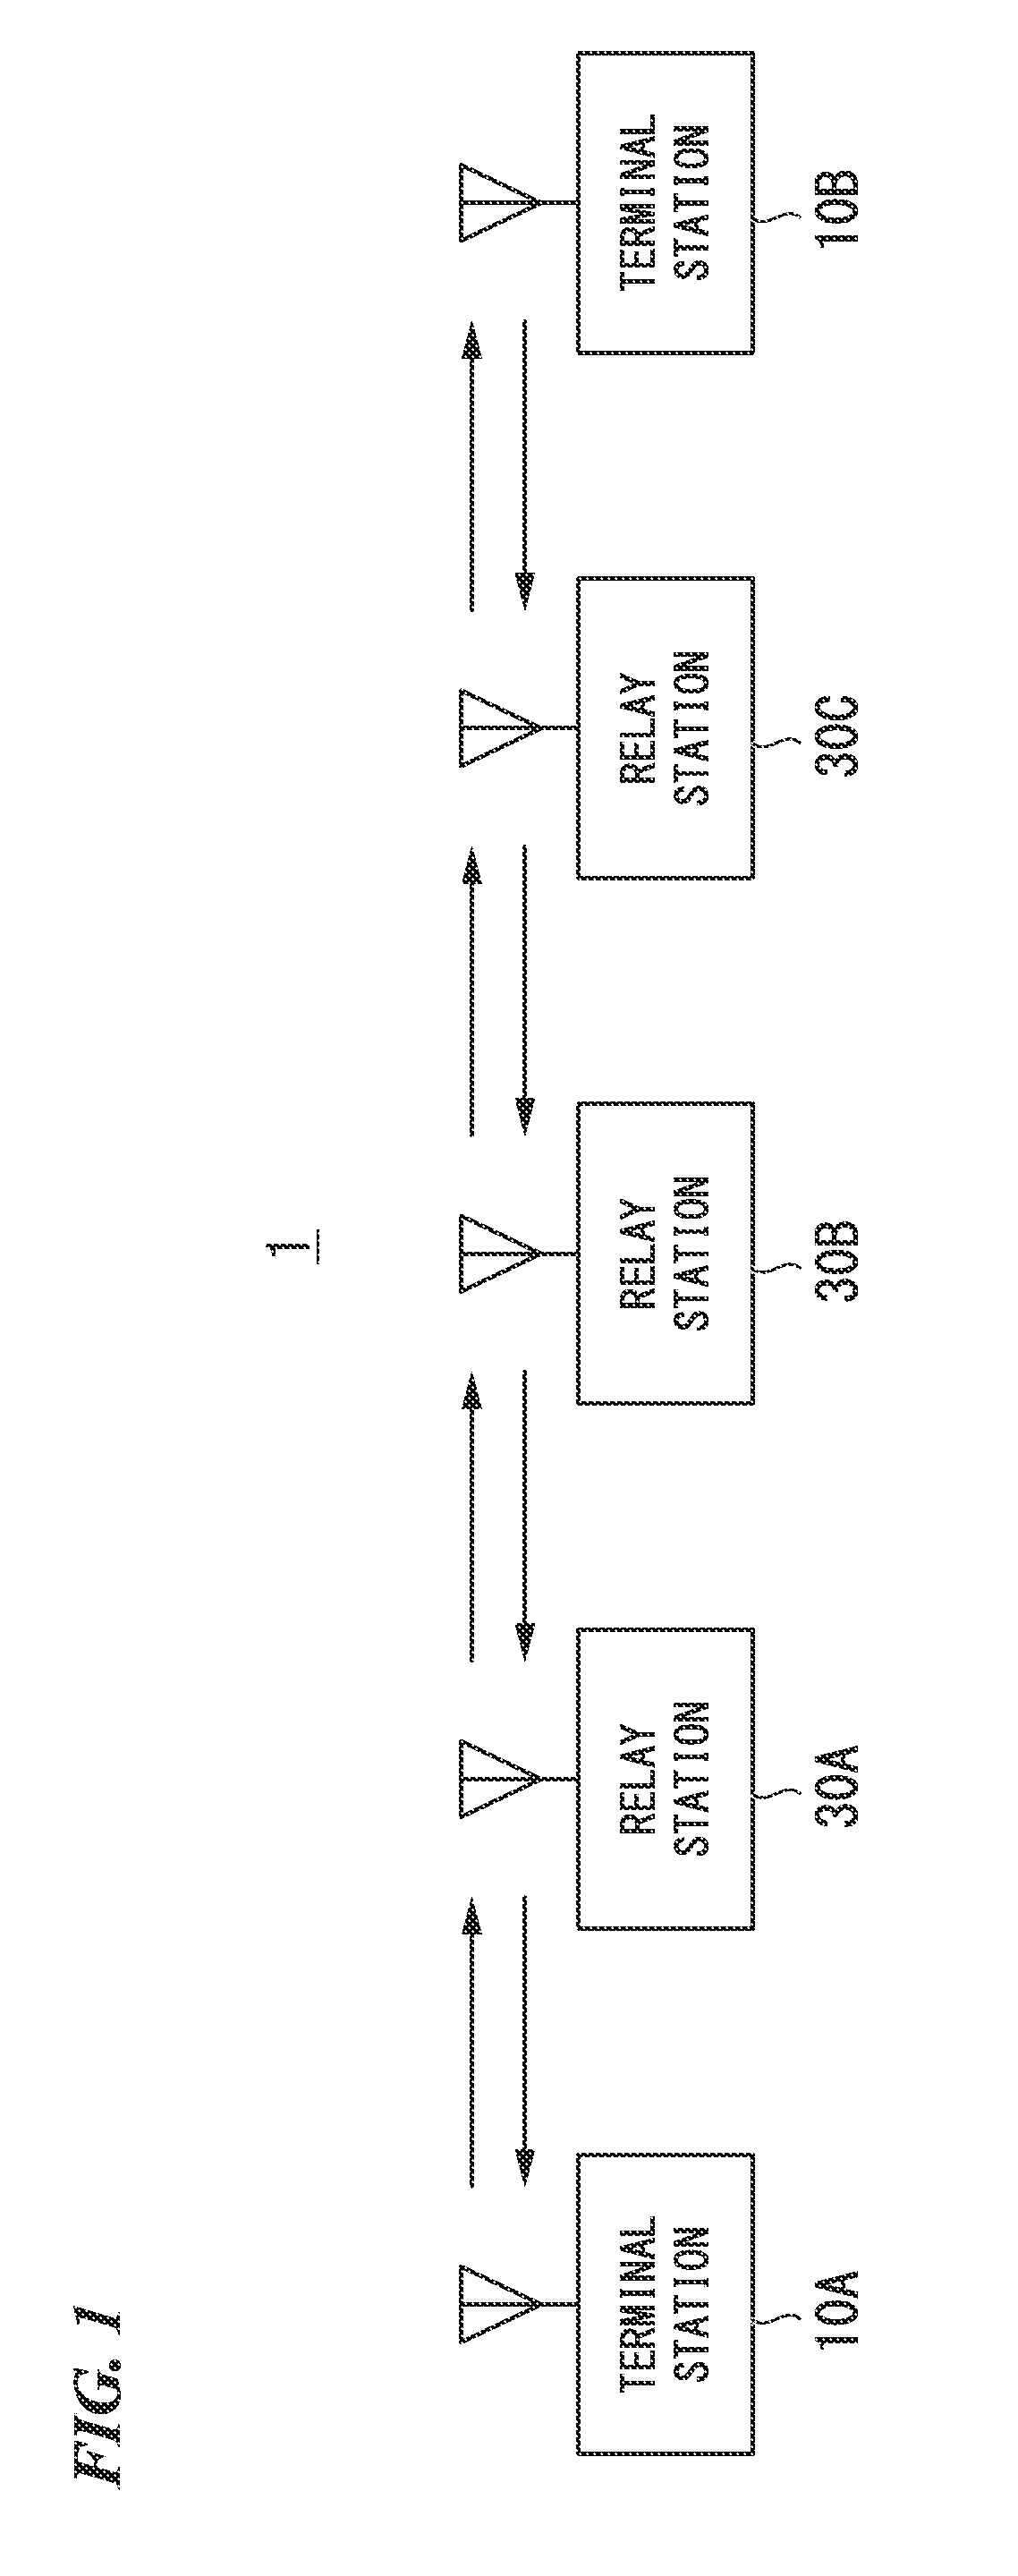 Access control system, access control method, relay station apparatus, terminal station apparatus, transmitting side processing method, receiving side processing system, and receiving side processing method